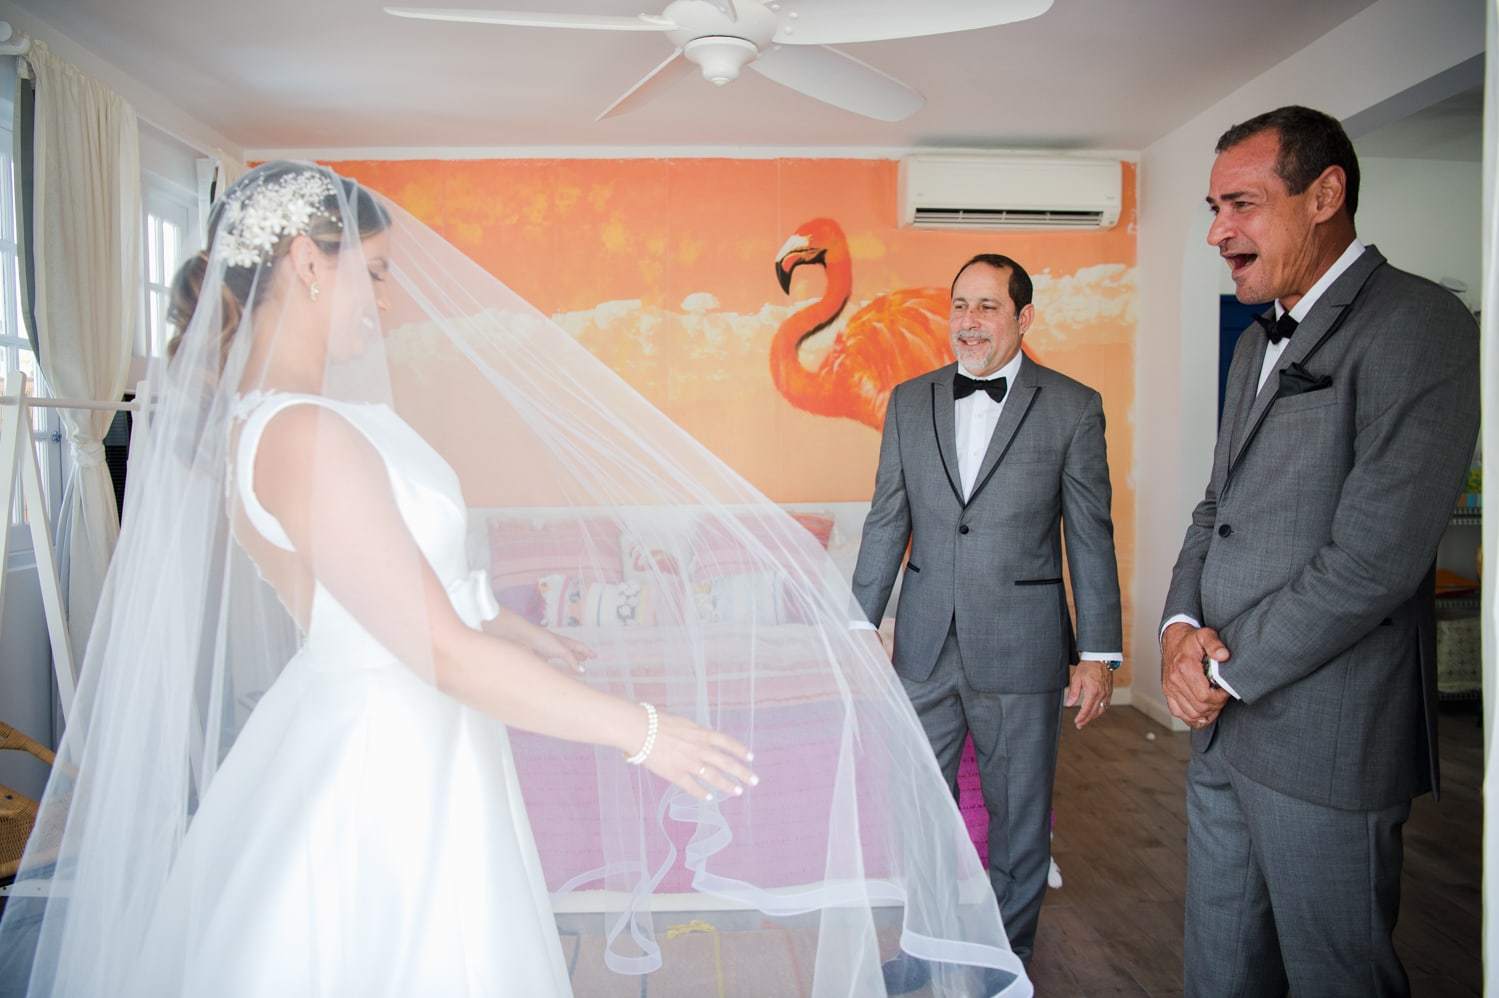 wedding photographer Camille Fontanez captures the bride and groom preparation, getting ready for their wedding day in the beautiful rooms of Casa Los Cummings in Condado Puerto Rico